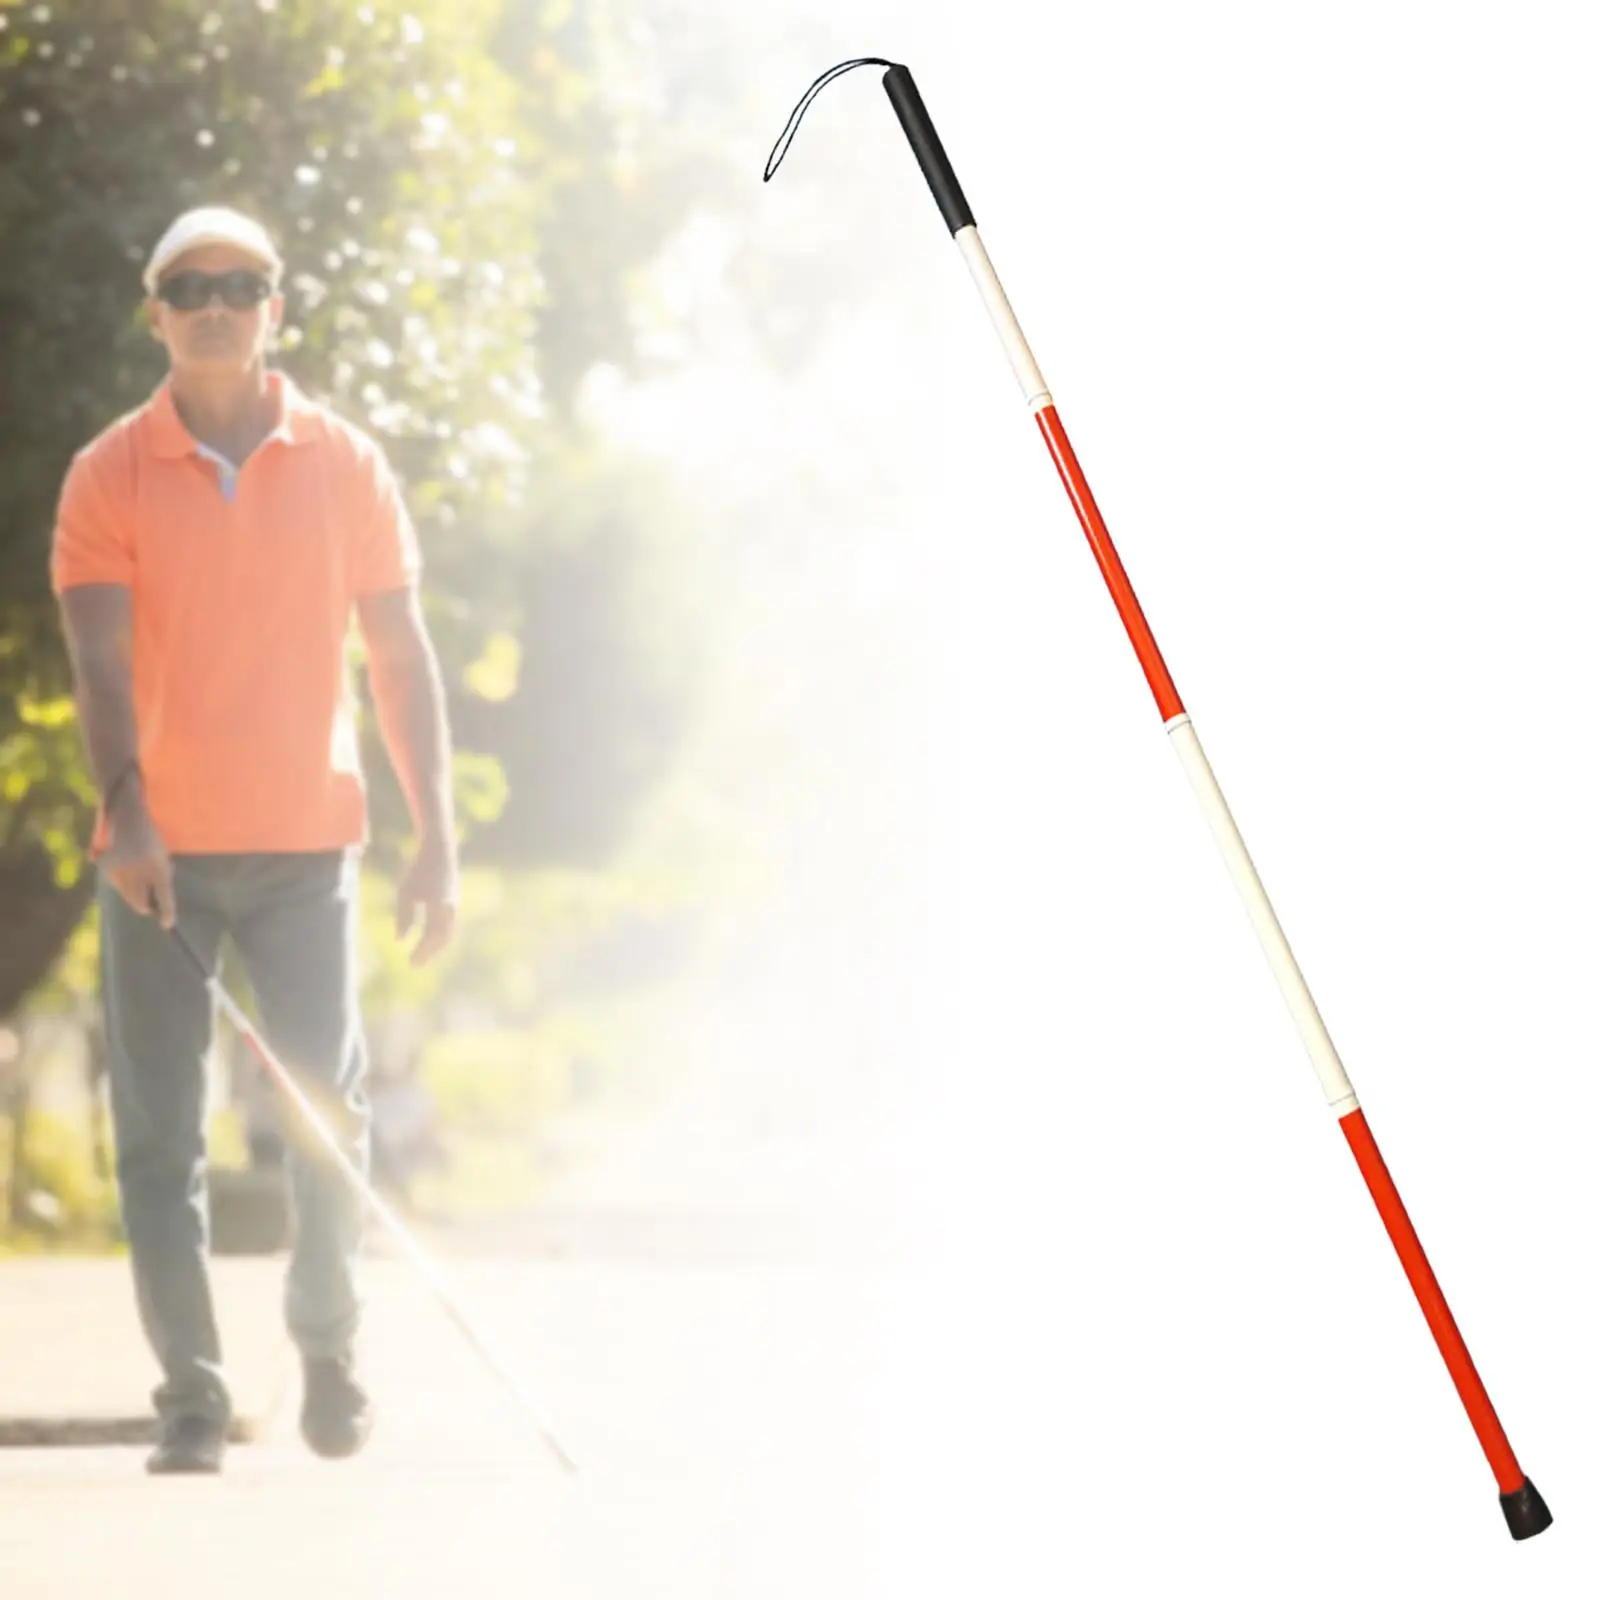 Folding Mobility Cane Guide Crutch Walking Cane with Wrist Strap Collapsible Hand Walking Stick Blind Cane for Vision Impaired